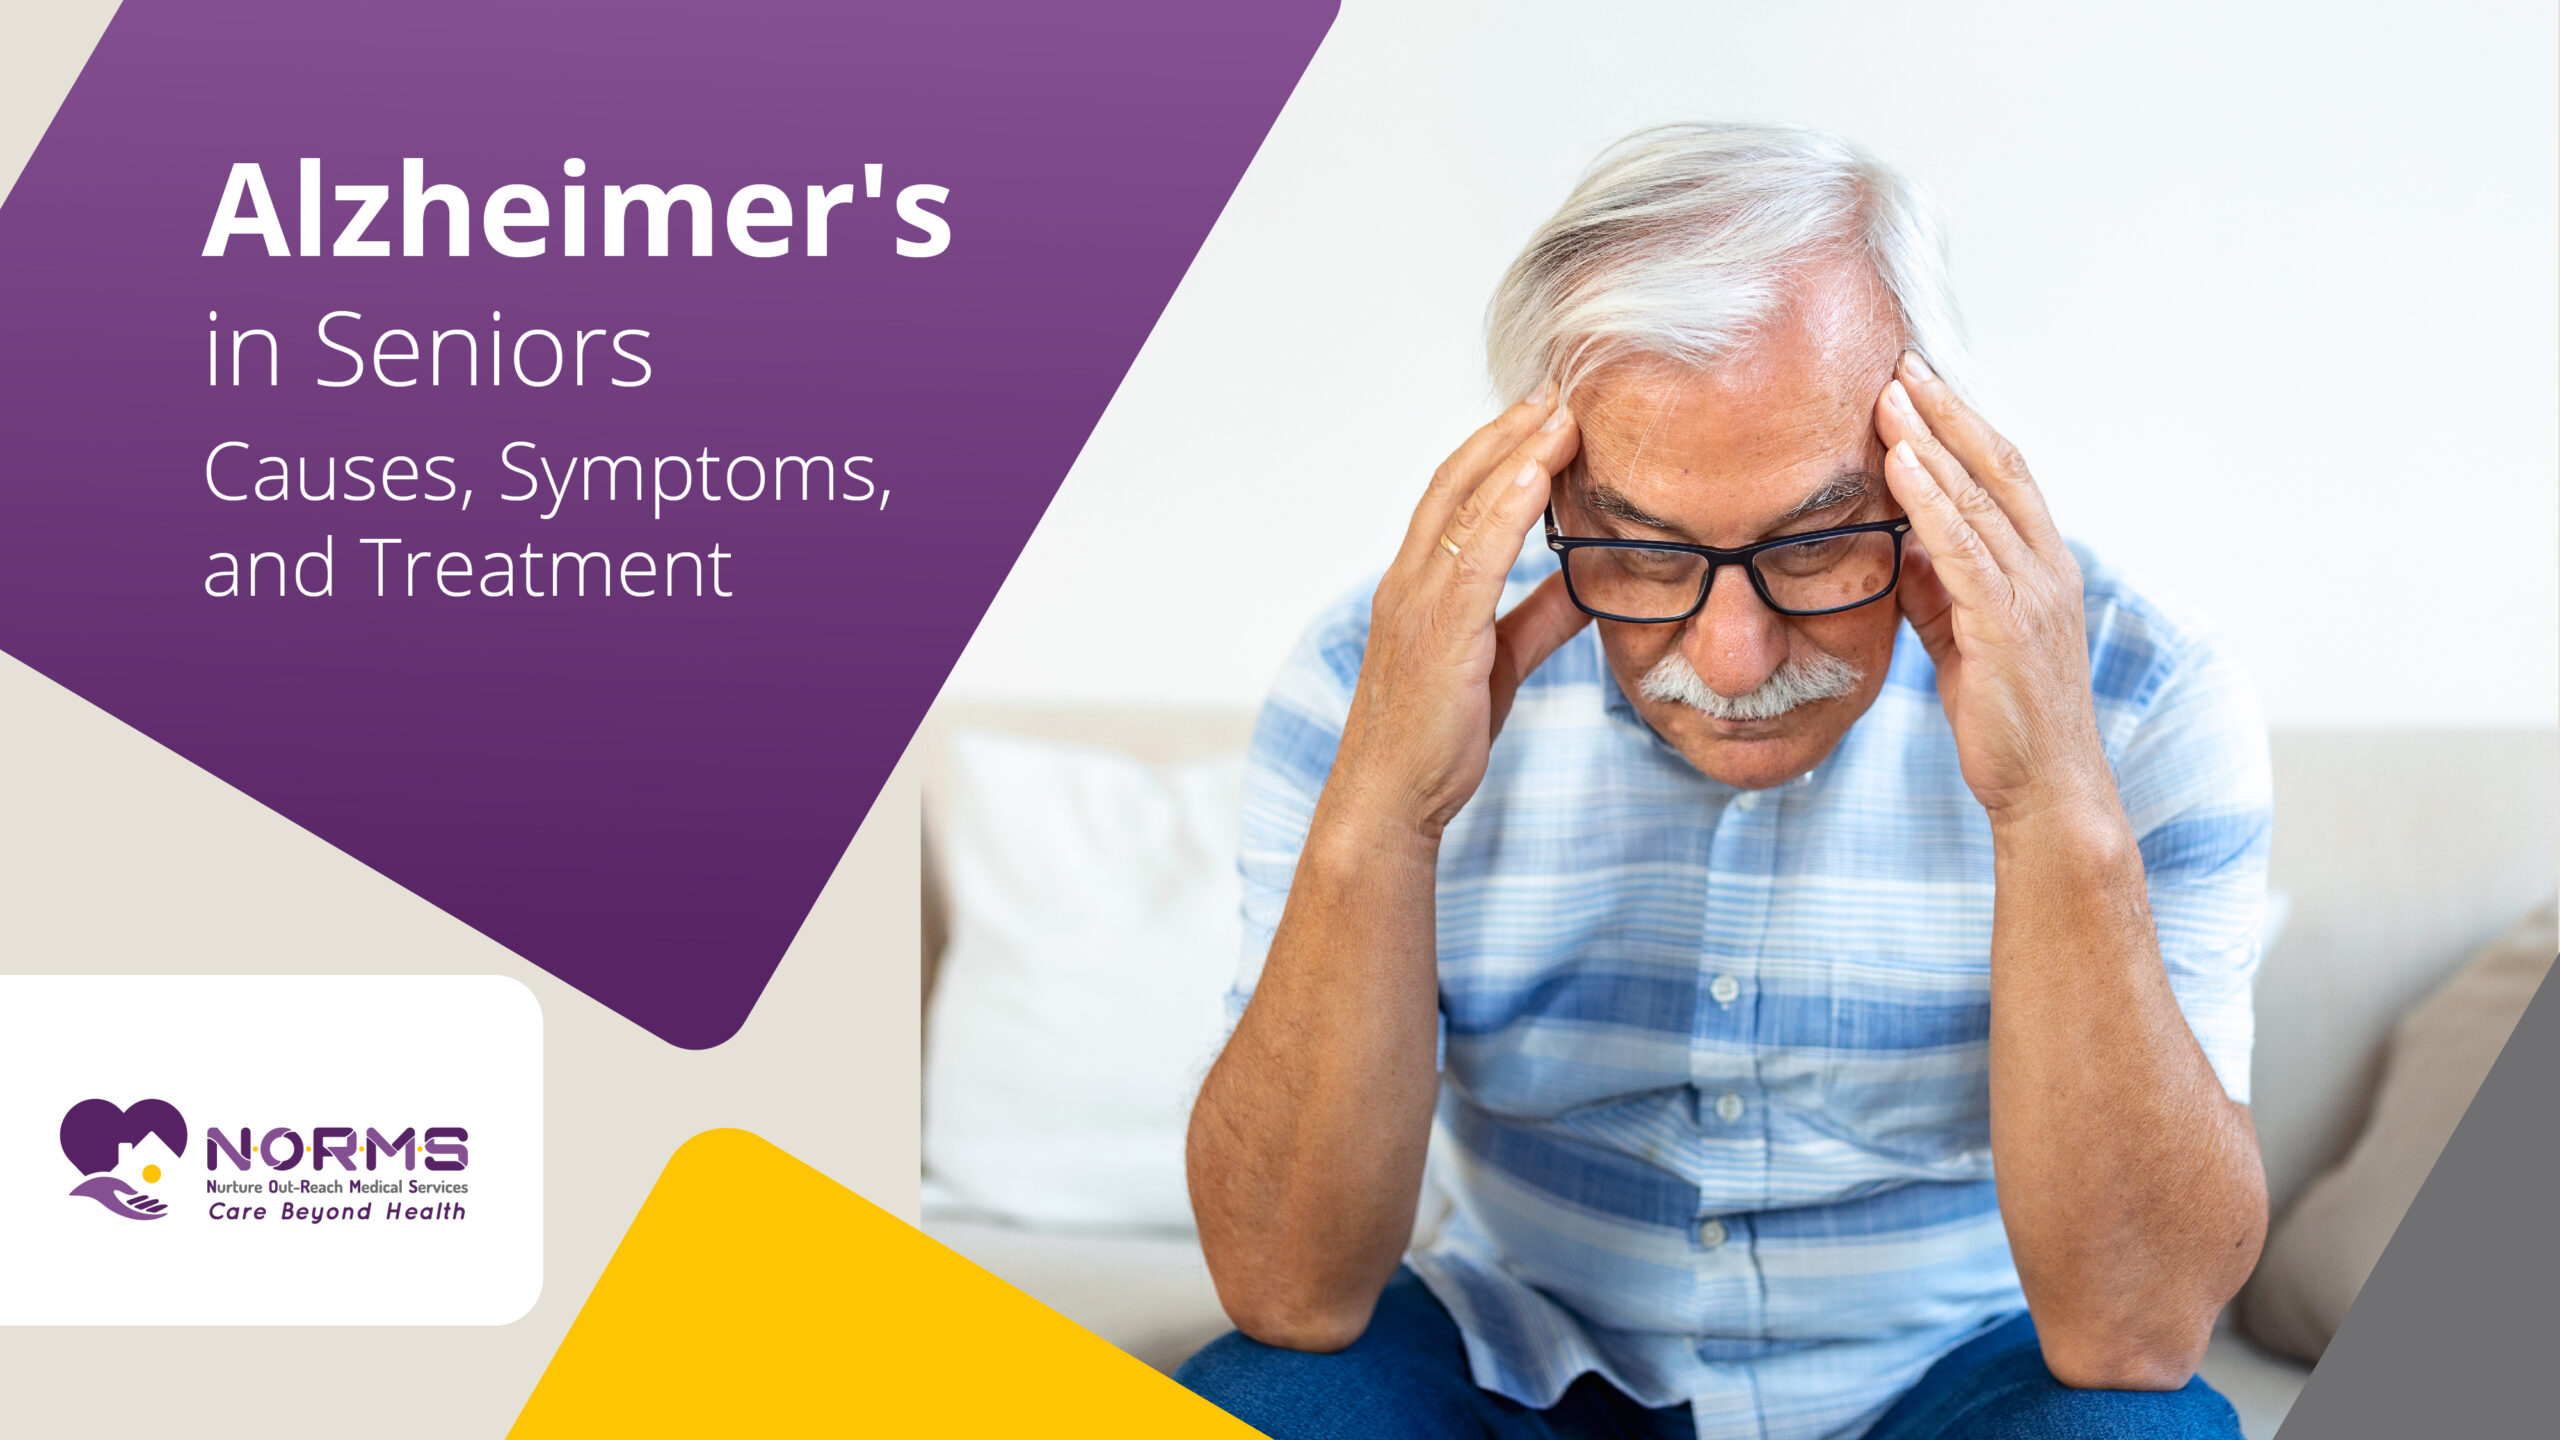 Alzheimer’s in Seniors: Causes, Symptoms, and Treatment